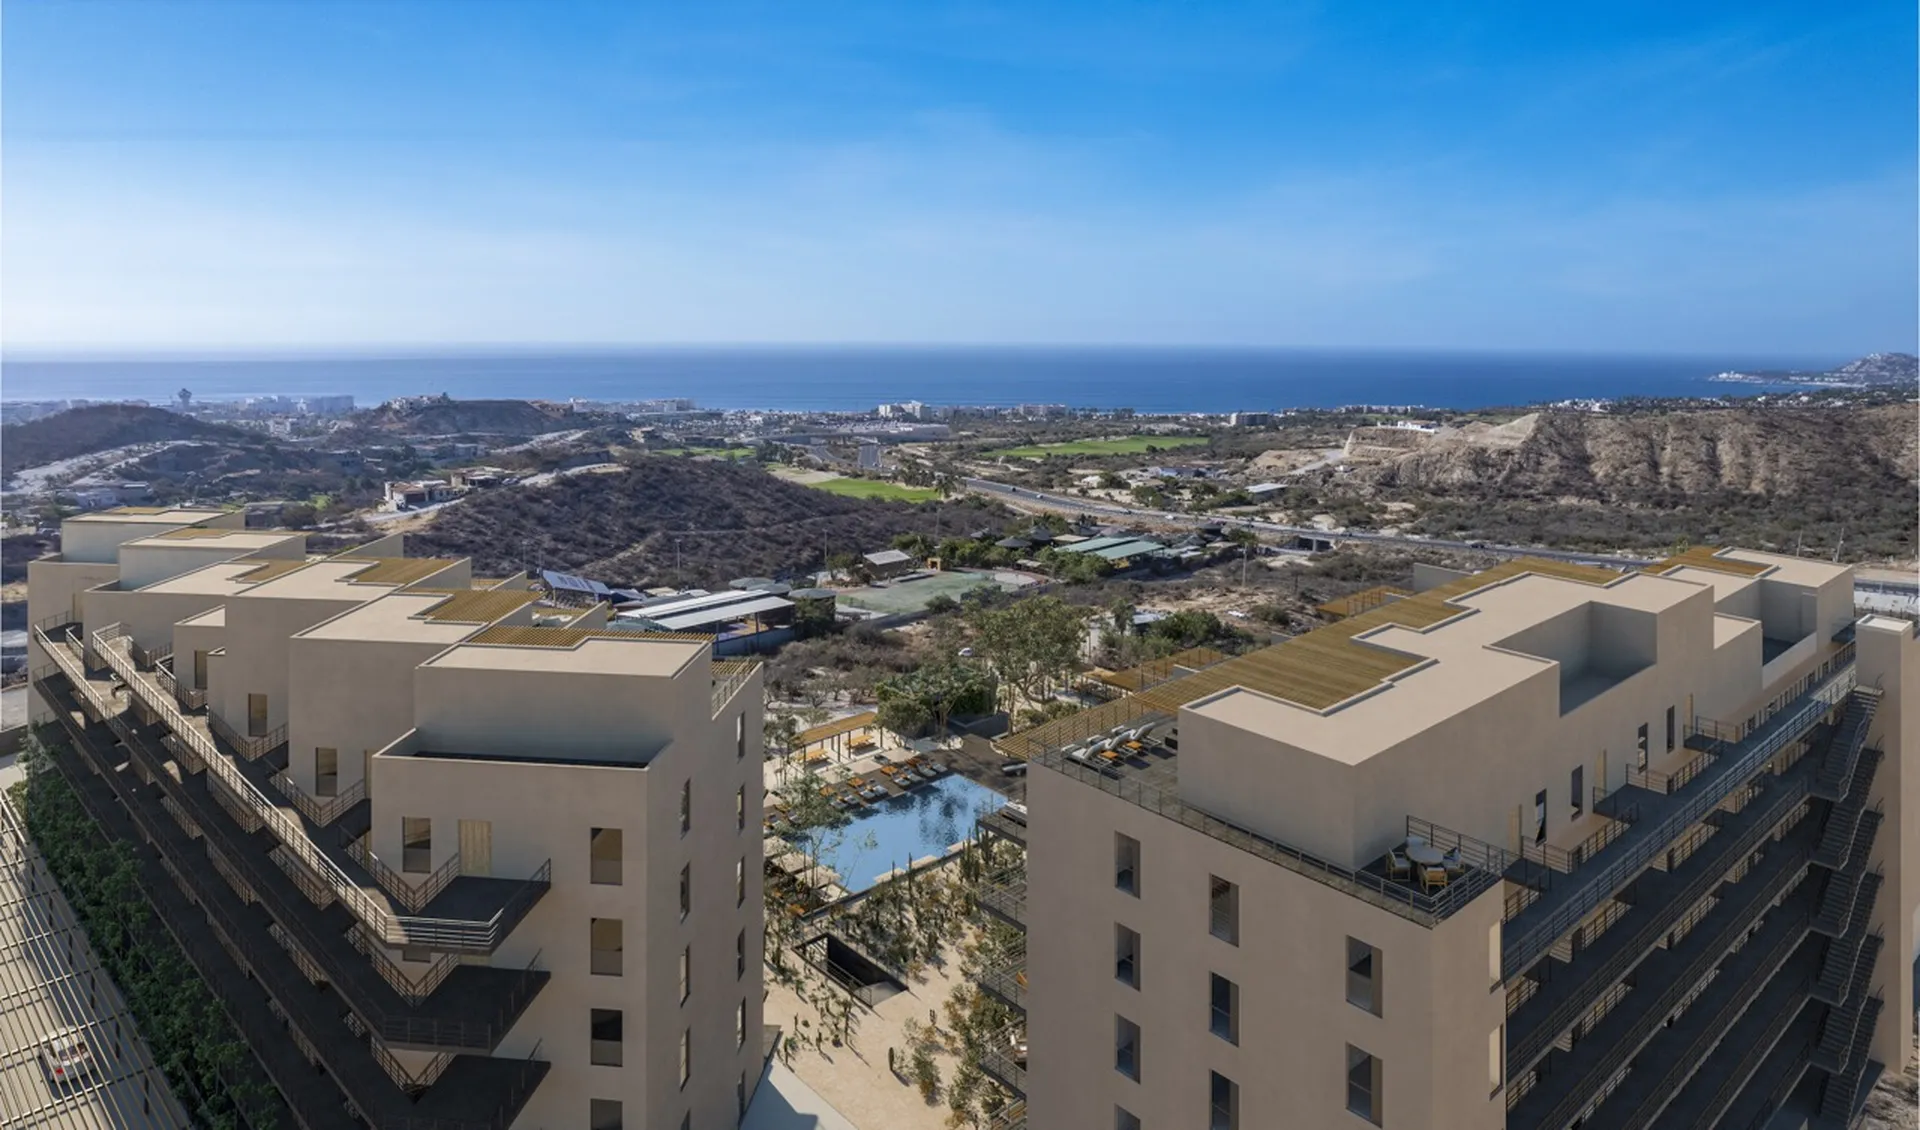 Discover the luxurious Zarzal community, featuring 84 exquisite residences located in the picturesque San Jose Del Cabo.